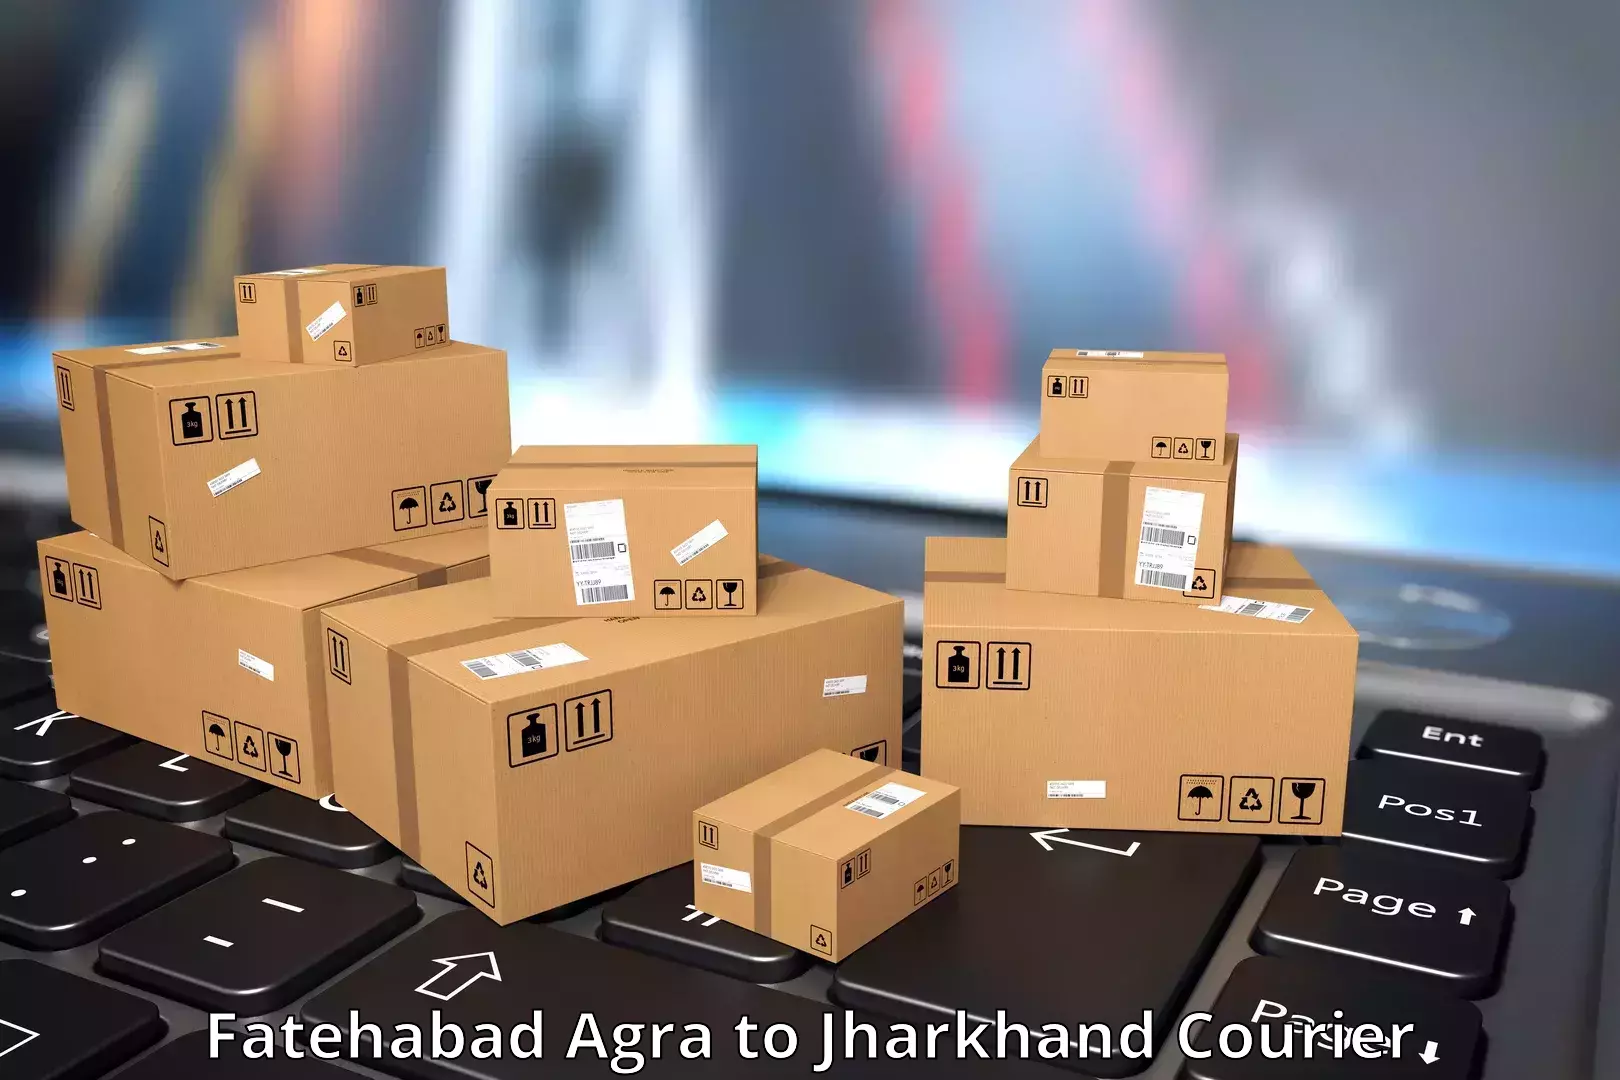 Advanced shipping network Fatehabad Agra to Jharkhand